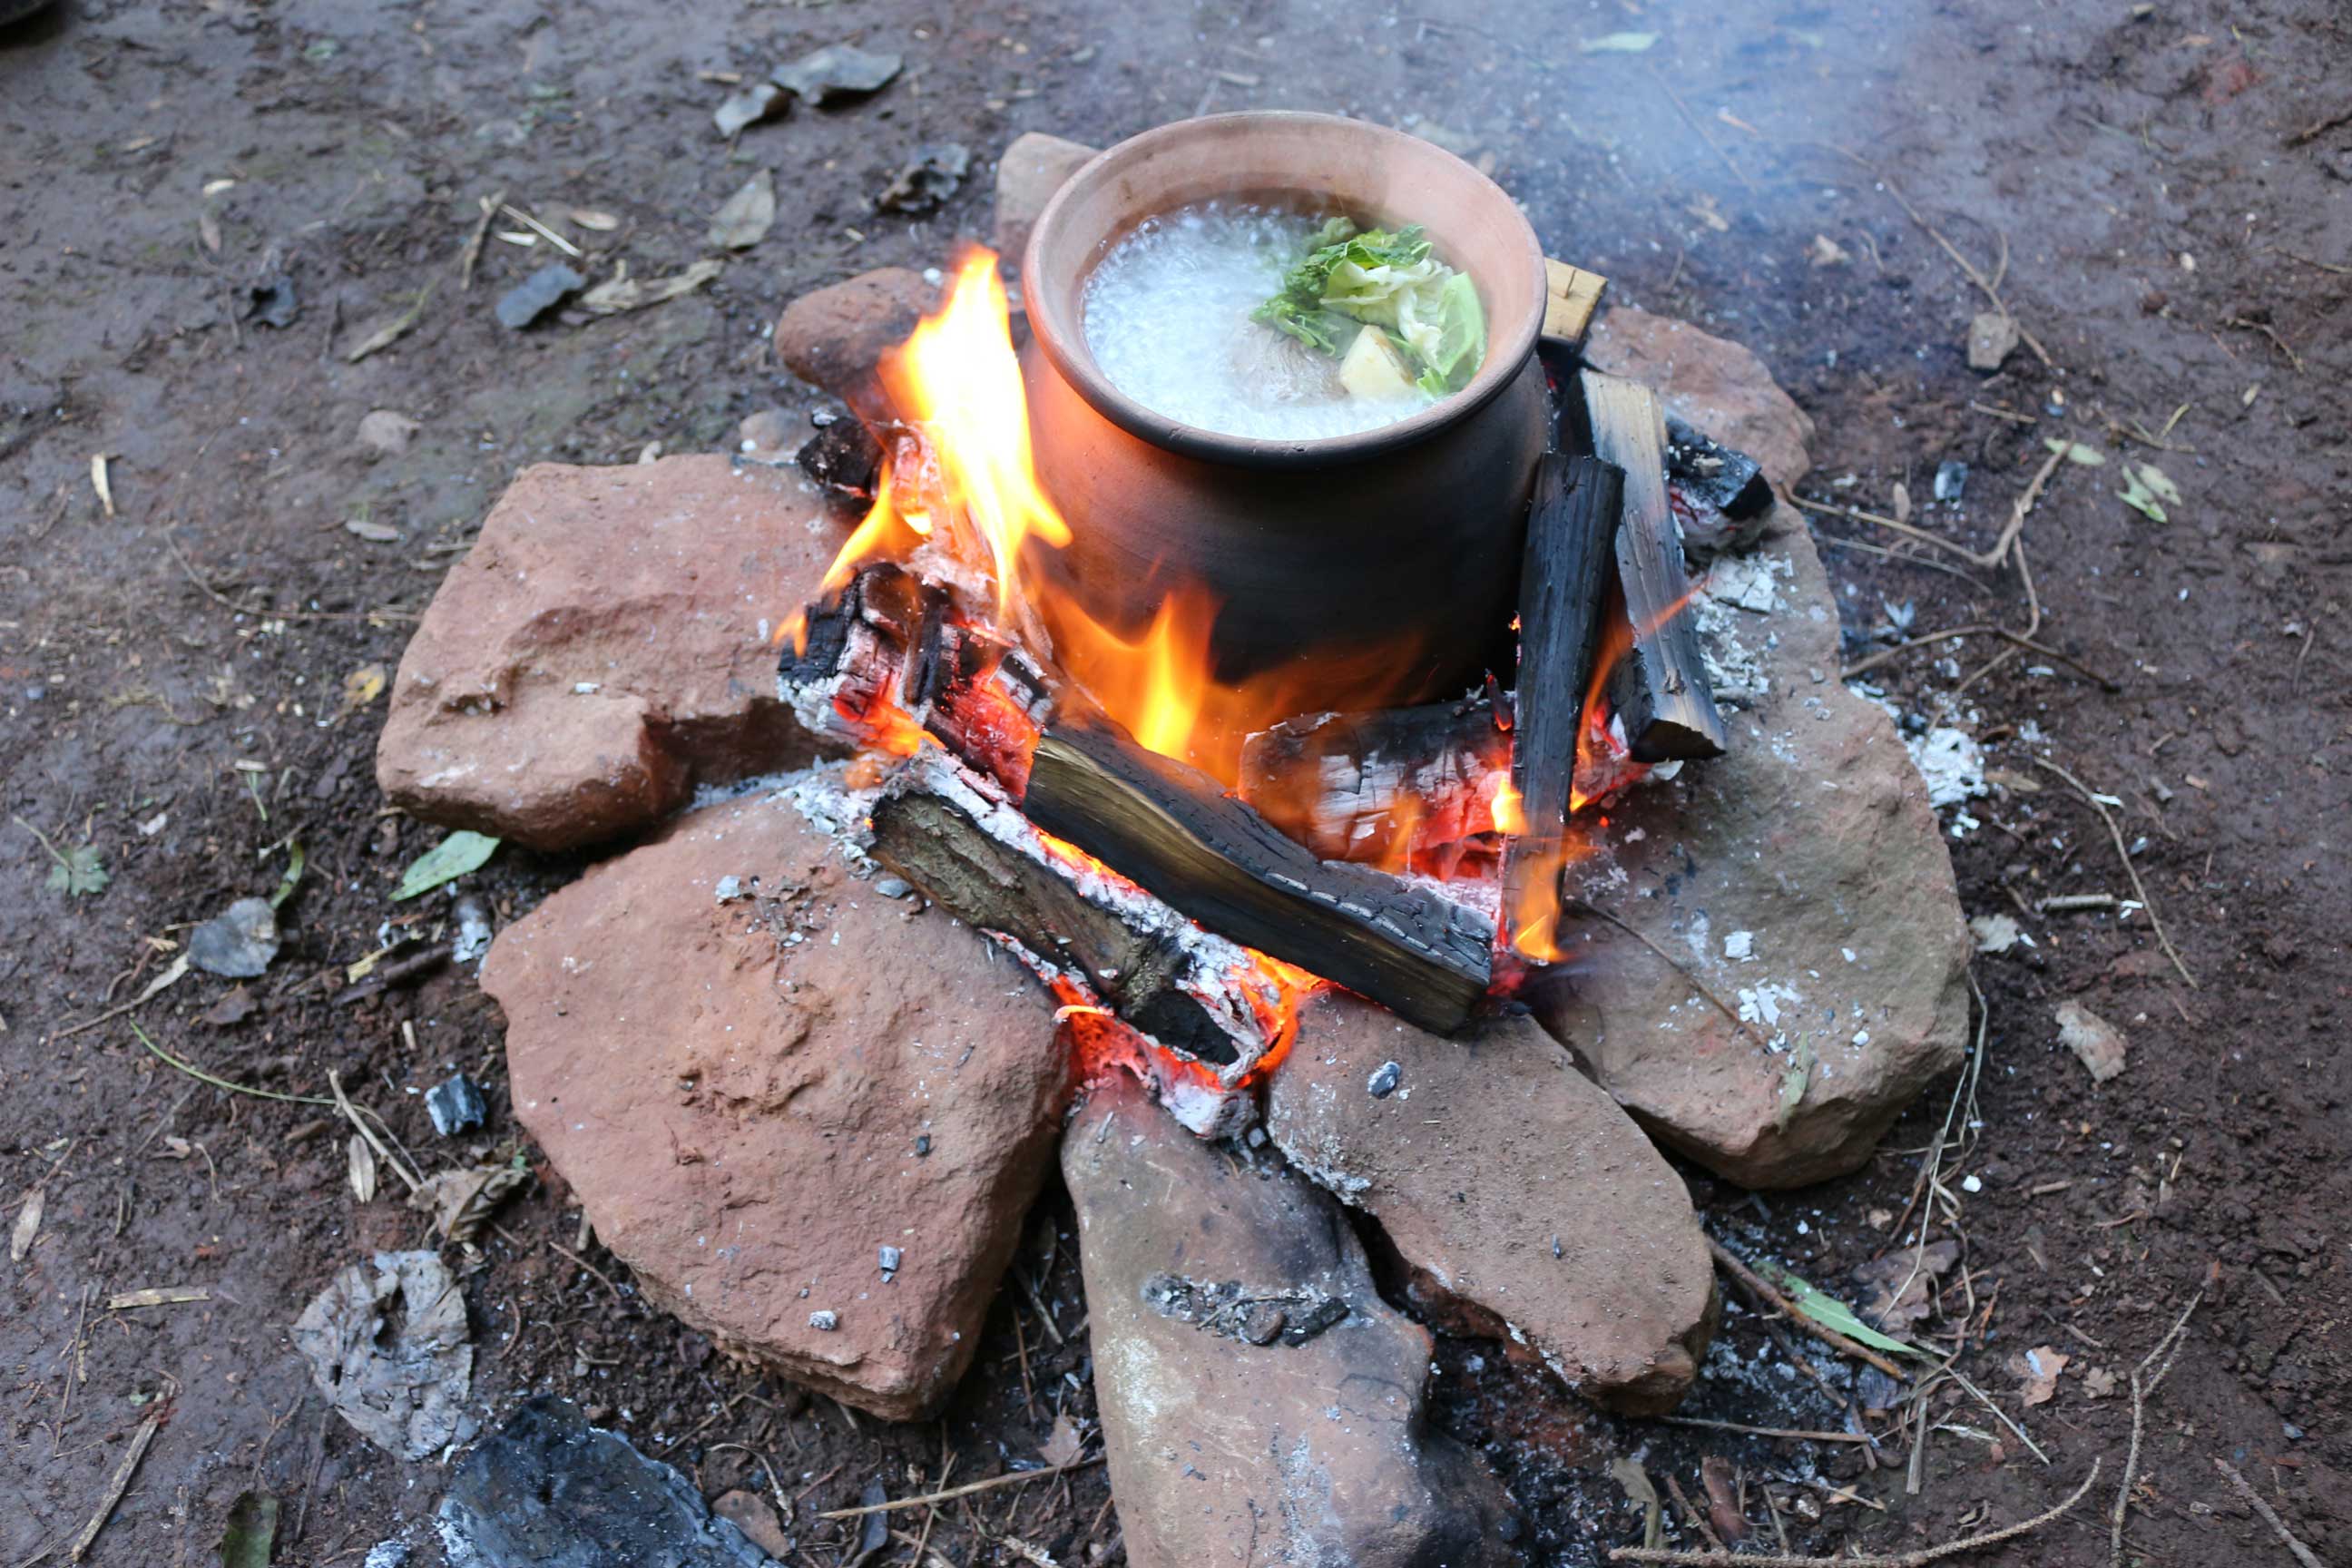 A reconstructed cooking pot and contents over a fire